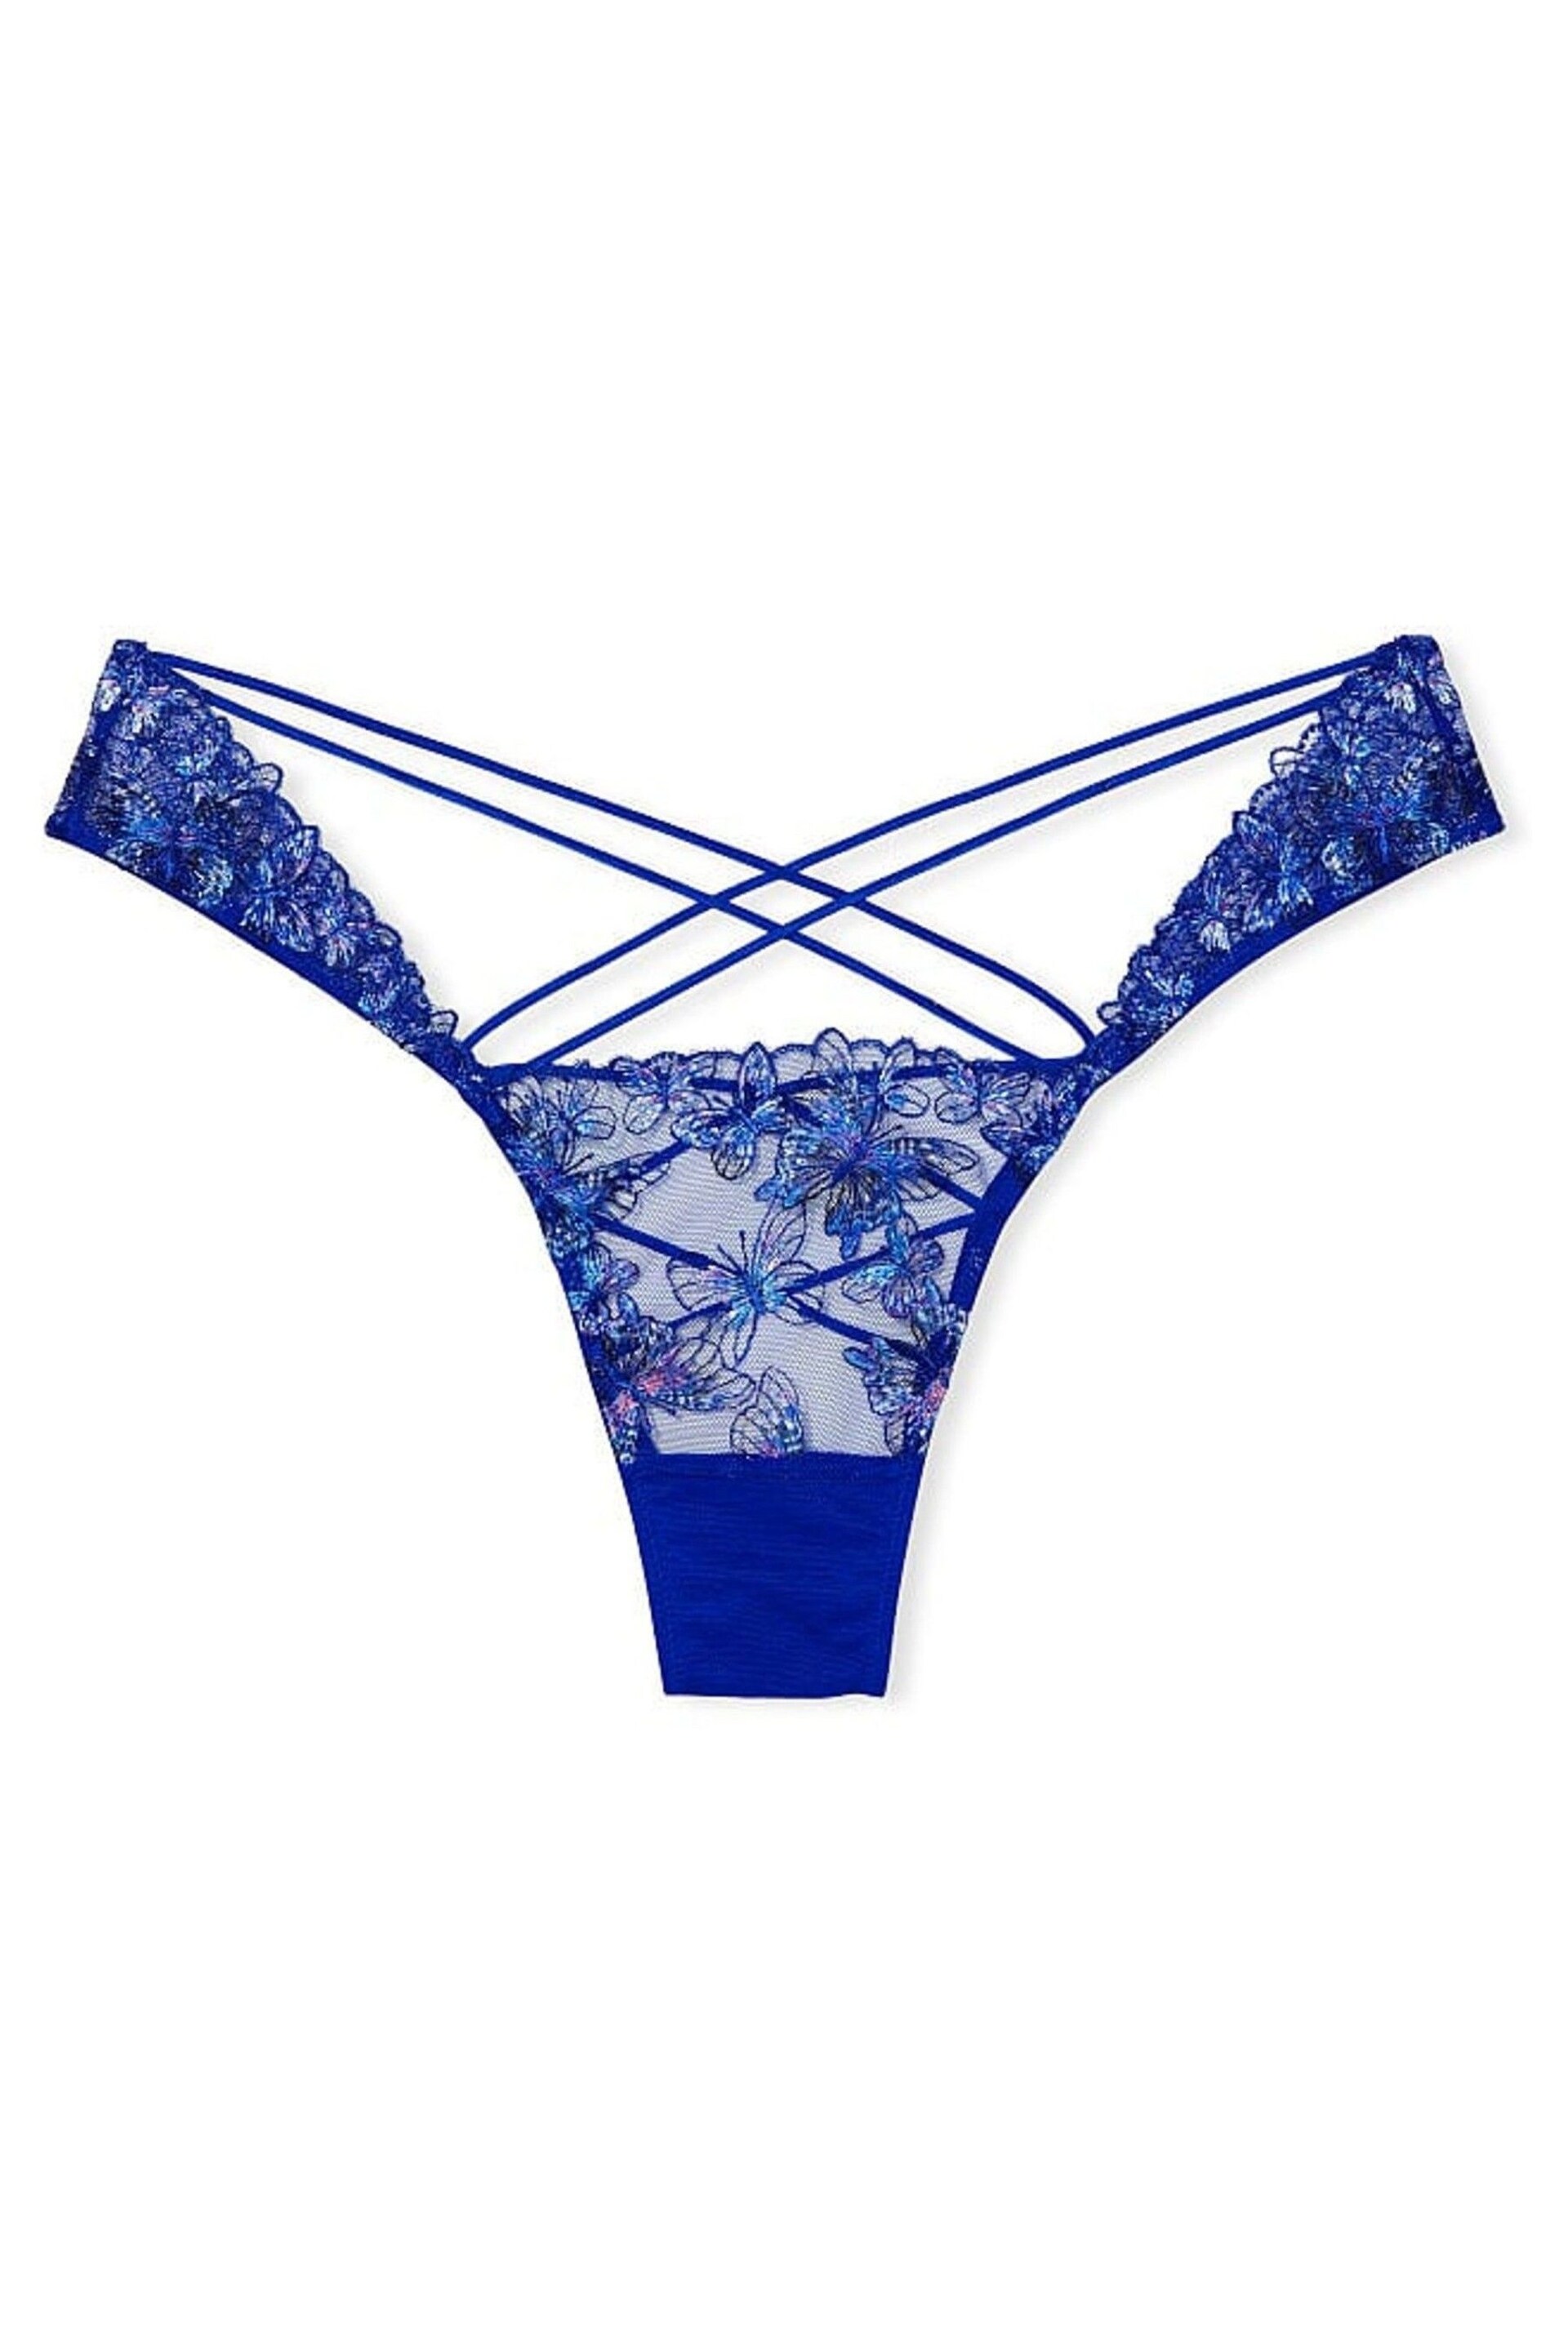 Victoria's Secret Blue Butterfly Embroidery Brazilian Embroidered Knickers - Image 3 of 5